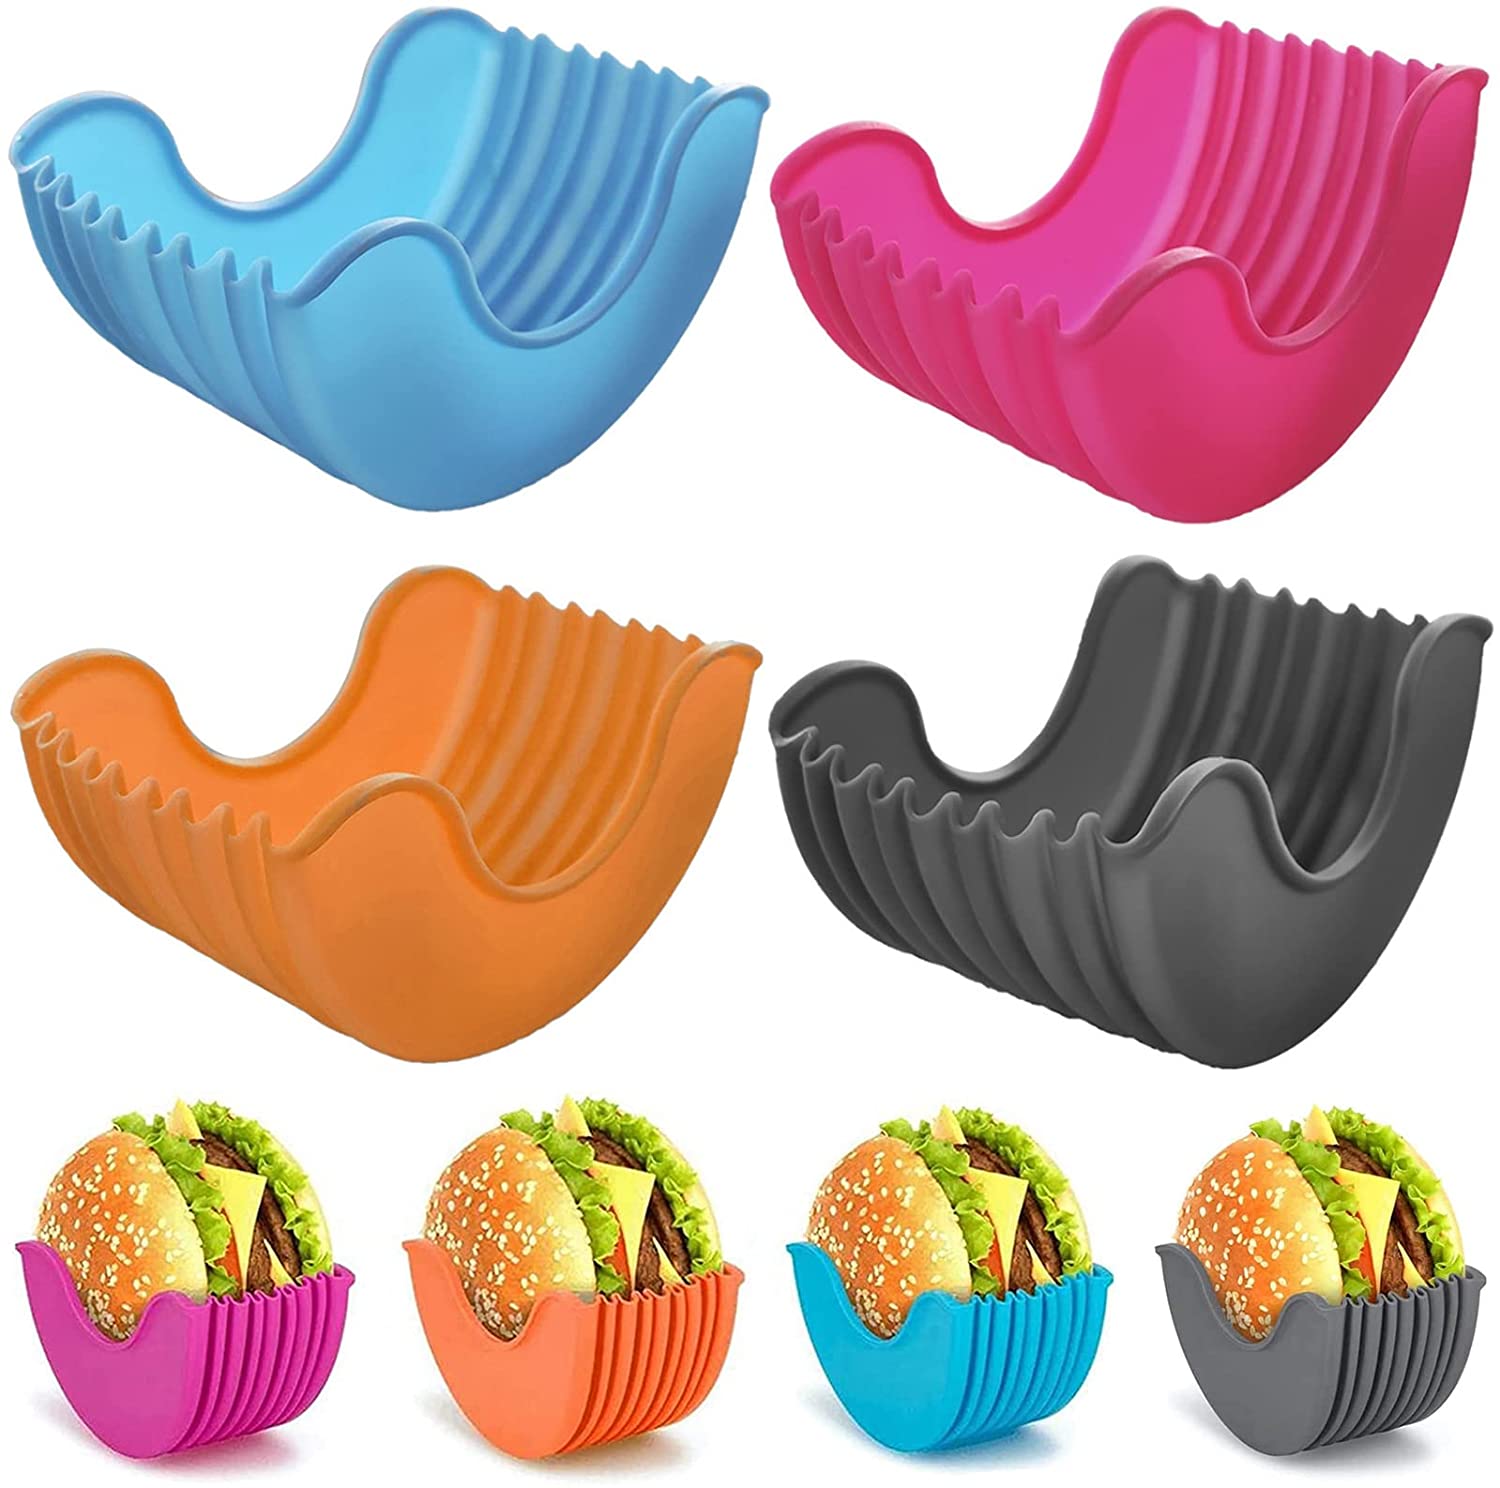 A colorful set of 4 hamburger holders with burgers illustrated to show how the holders work.